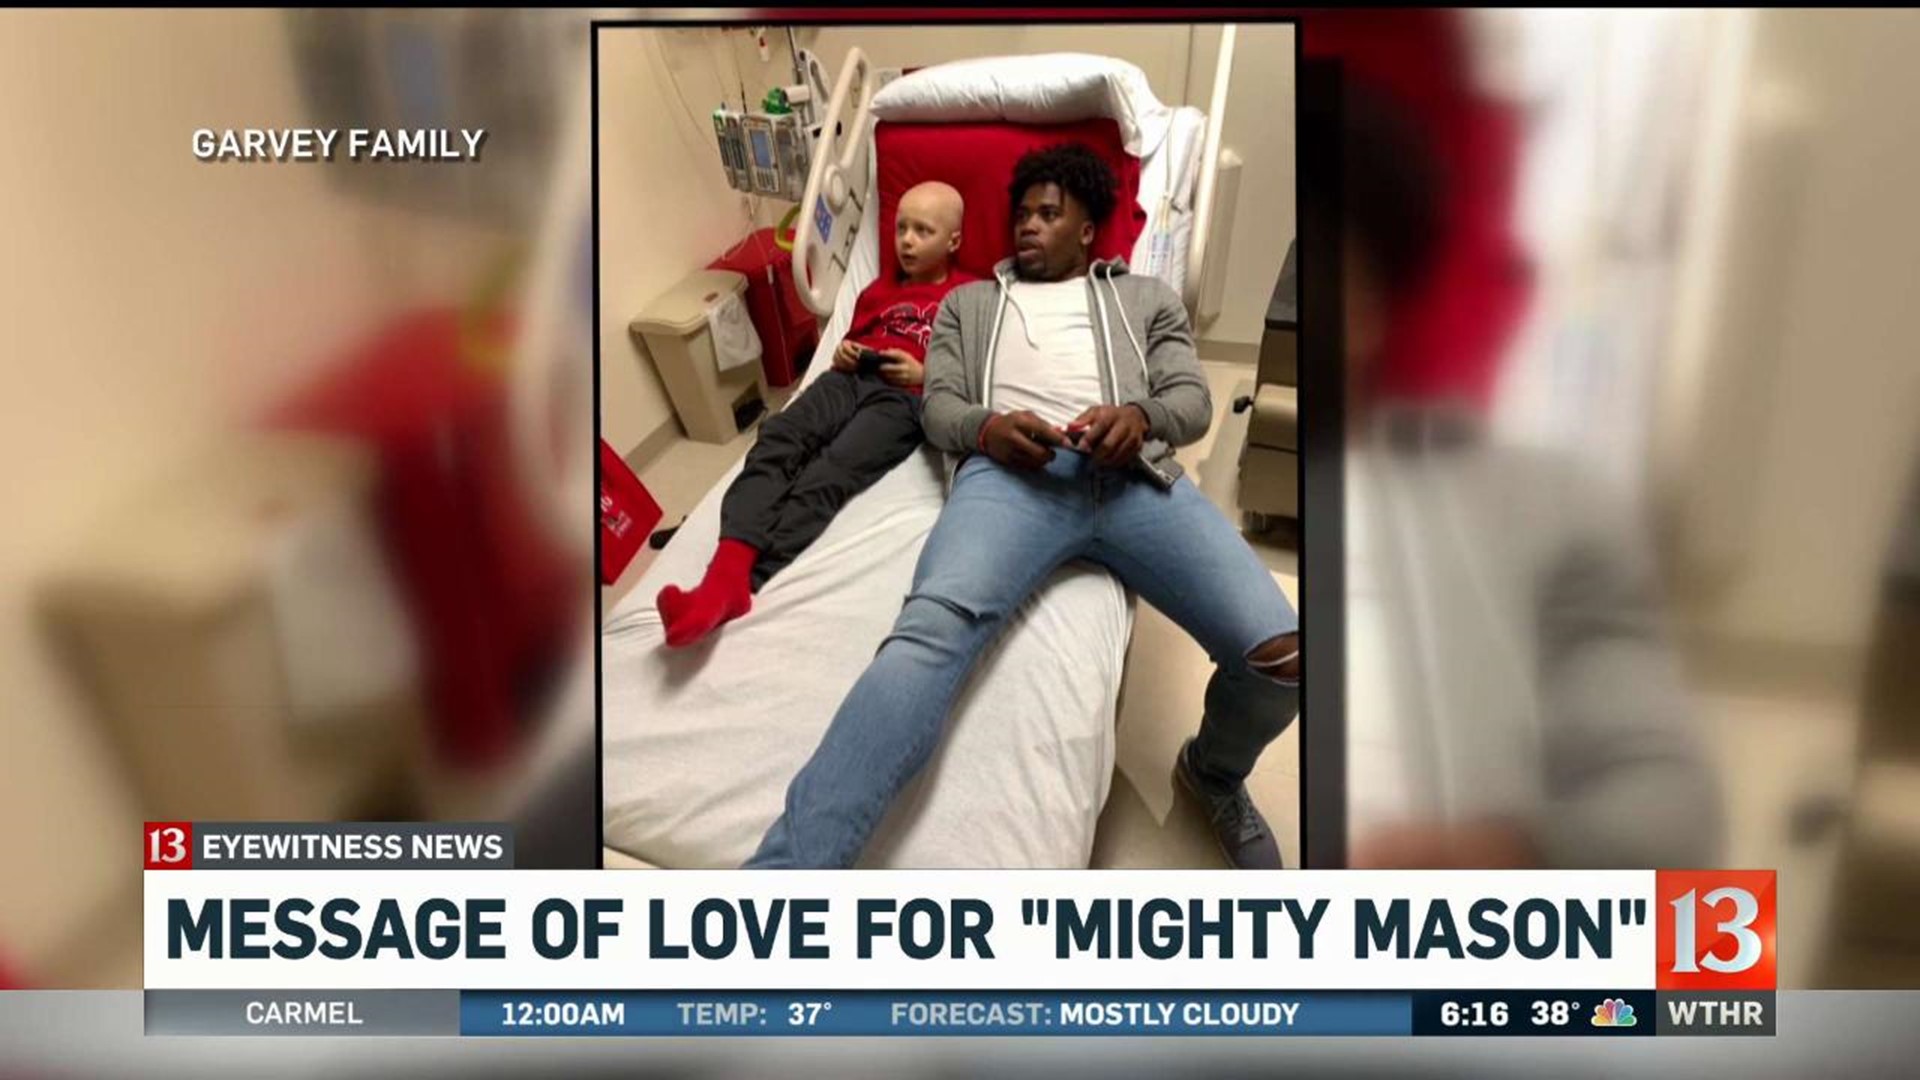 Message of love for "Mighty Mason"